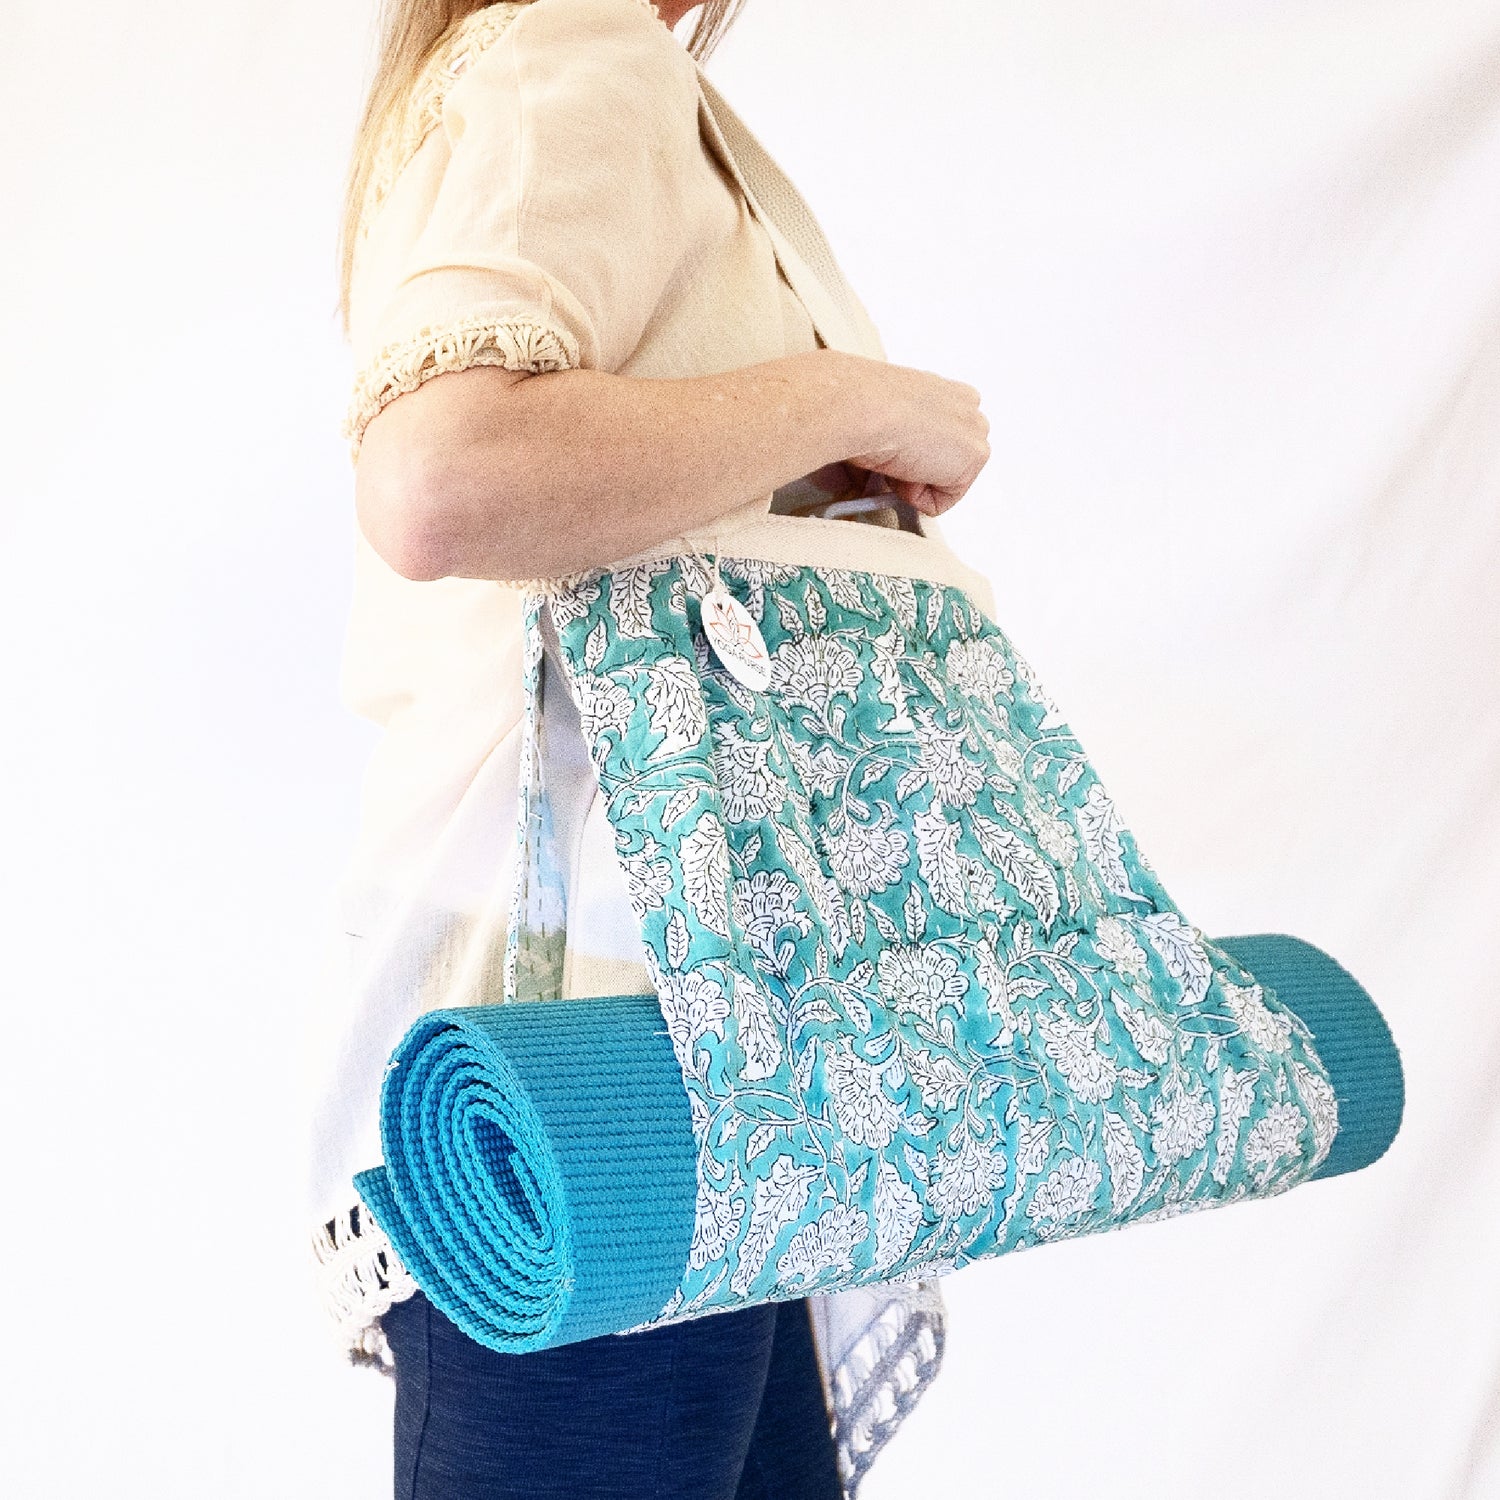 How to carry a yoga mat, Yoga Purse